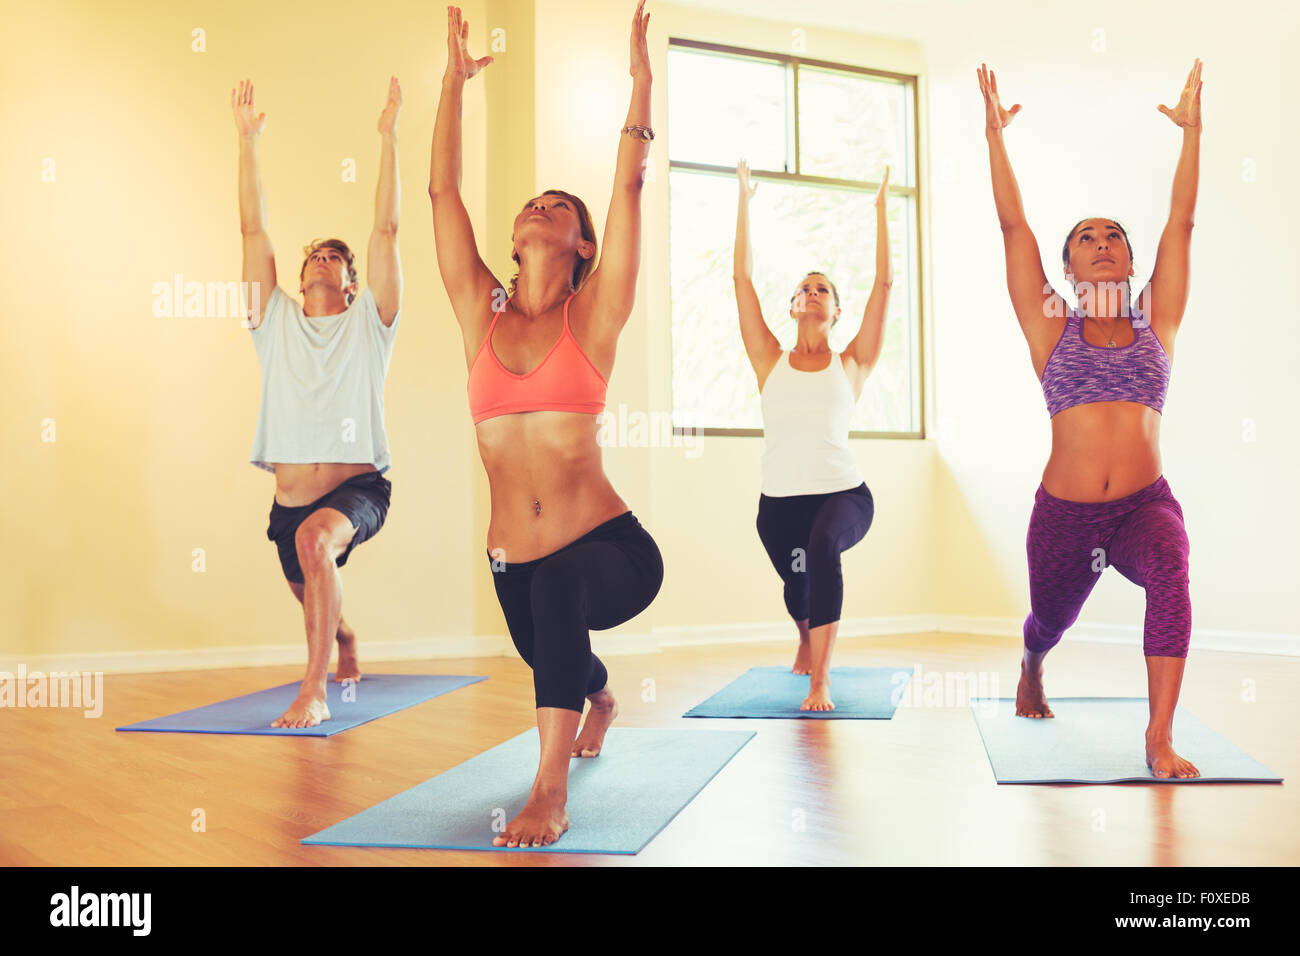 Group of People Relaxing and Doing Yoga. Wellness and Healthy Lifestyle. Stock Photo